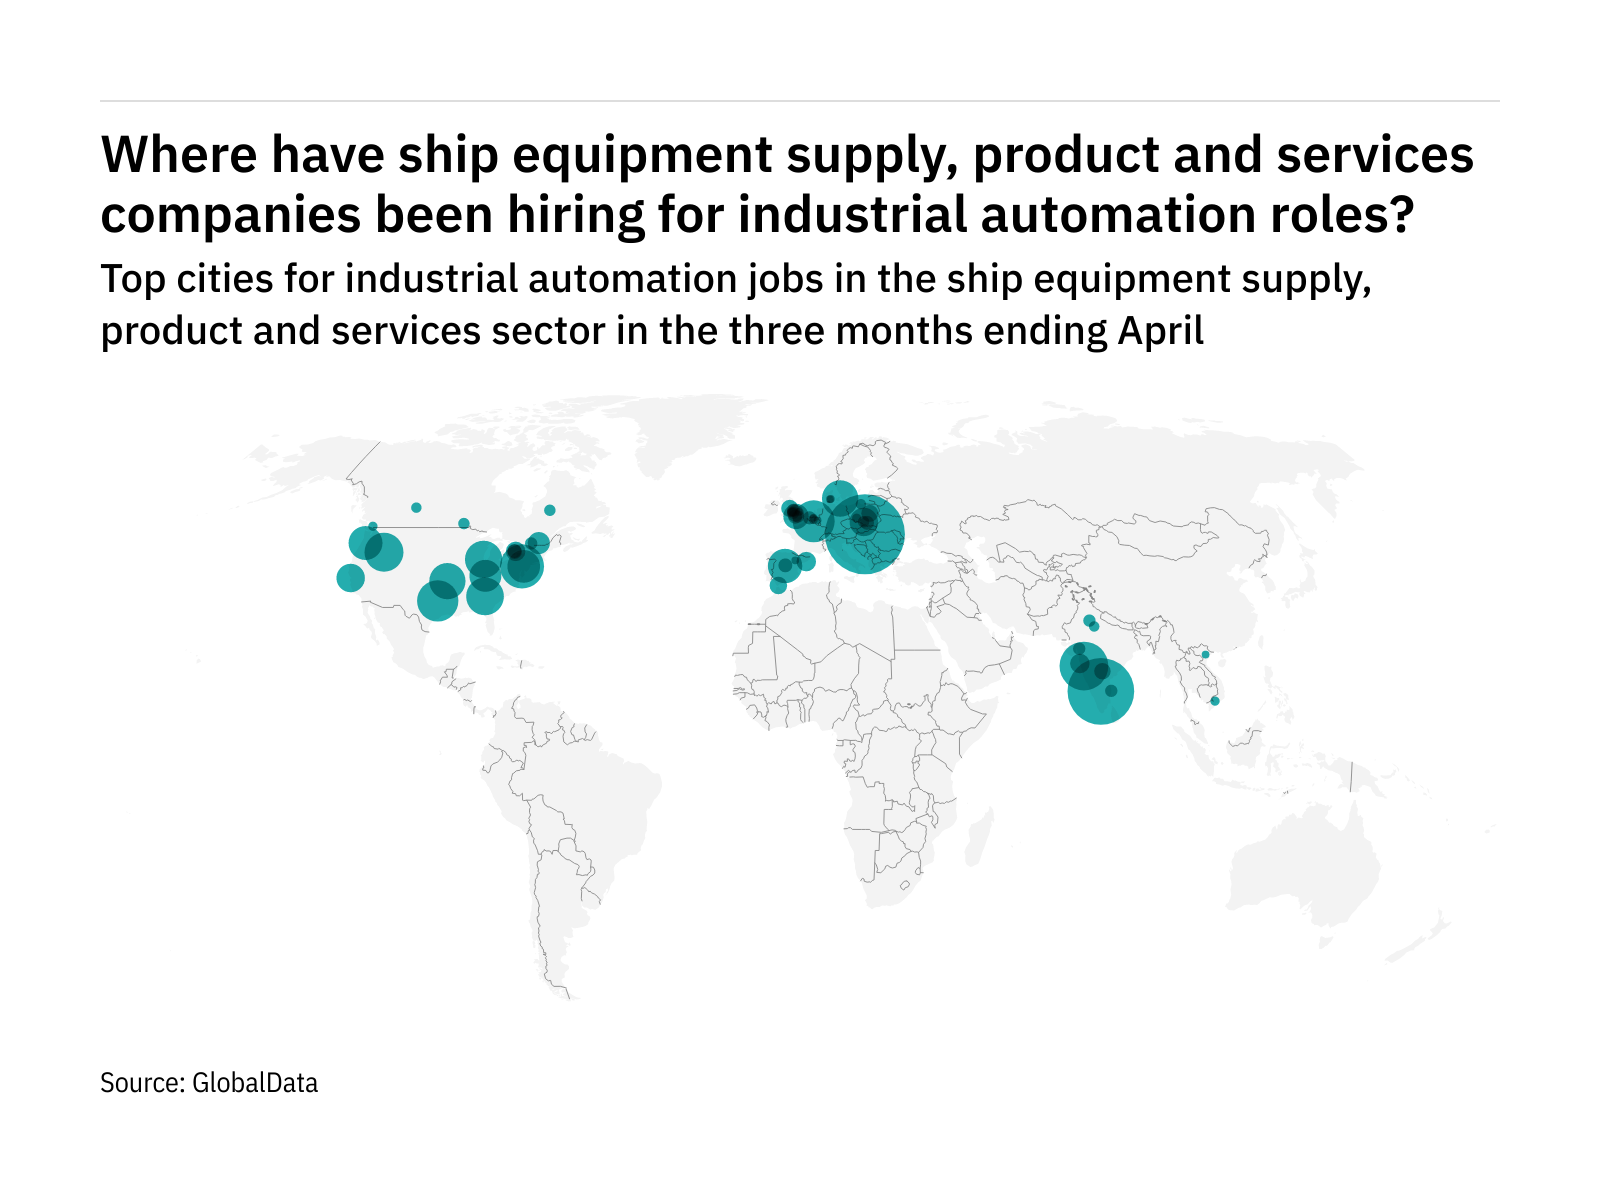 Europe is seeing a hiring boom in ship industry industrial automation roles